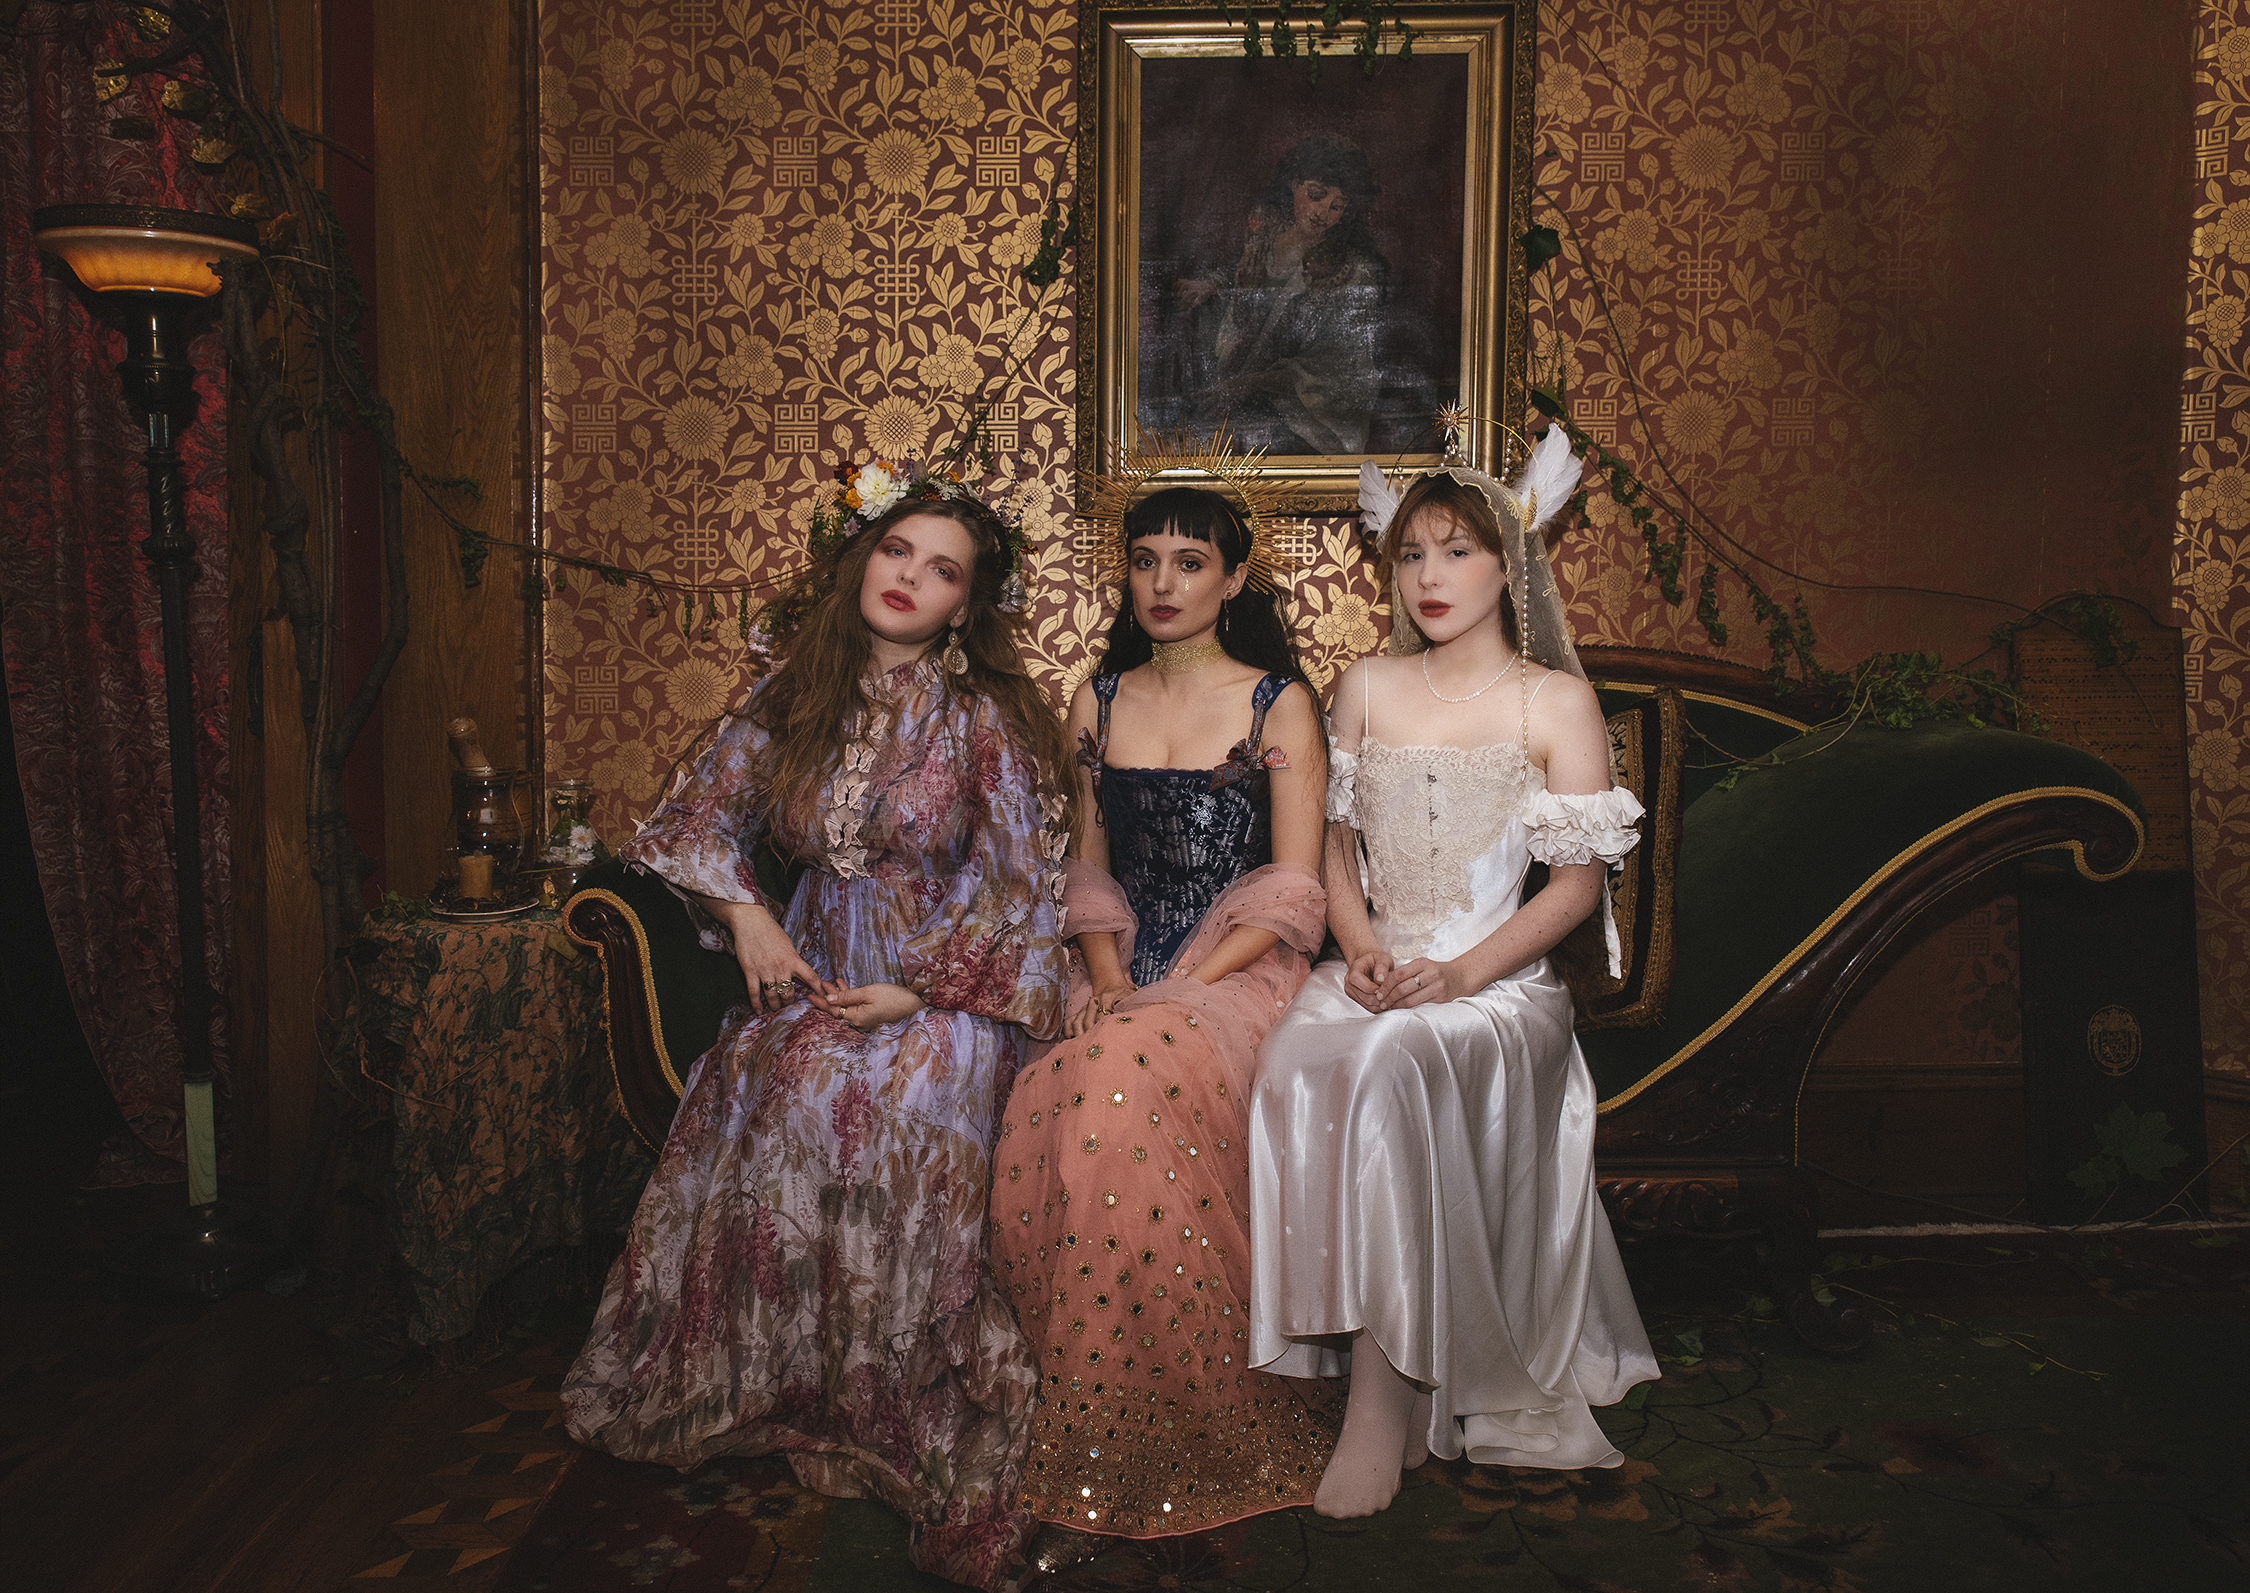 Three young women in romantic dresses sit on an ornate sofa in a richly decorated room.